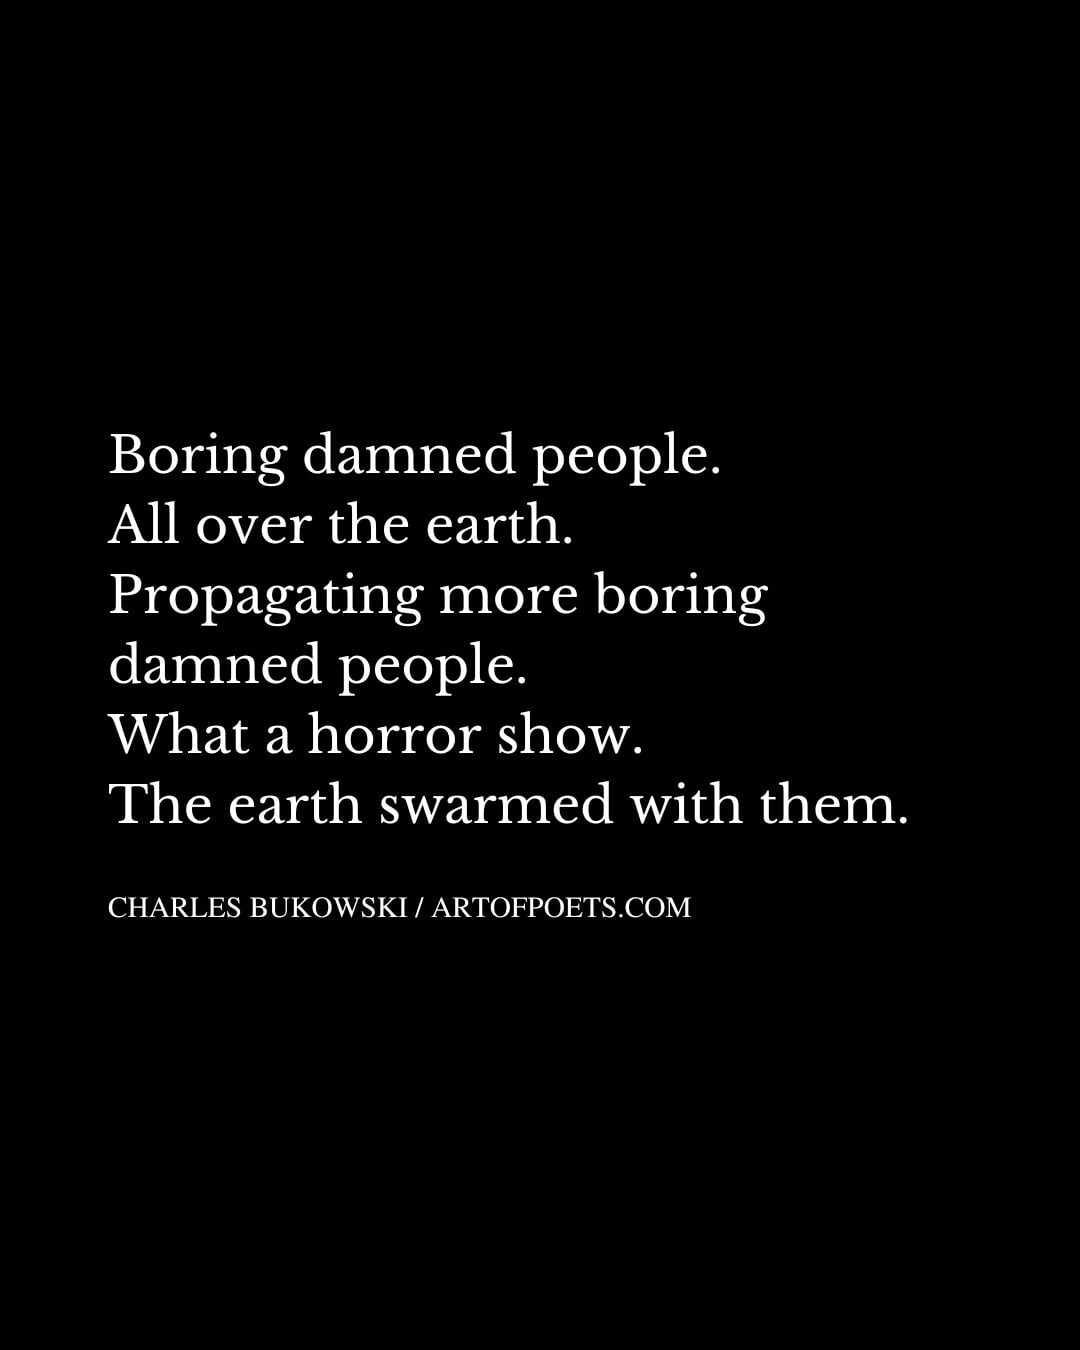 Boring damned people. All over the earth. Propagating more boring damned people. What a horror show. The earth swarmed with them 1